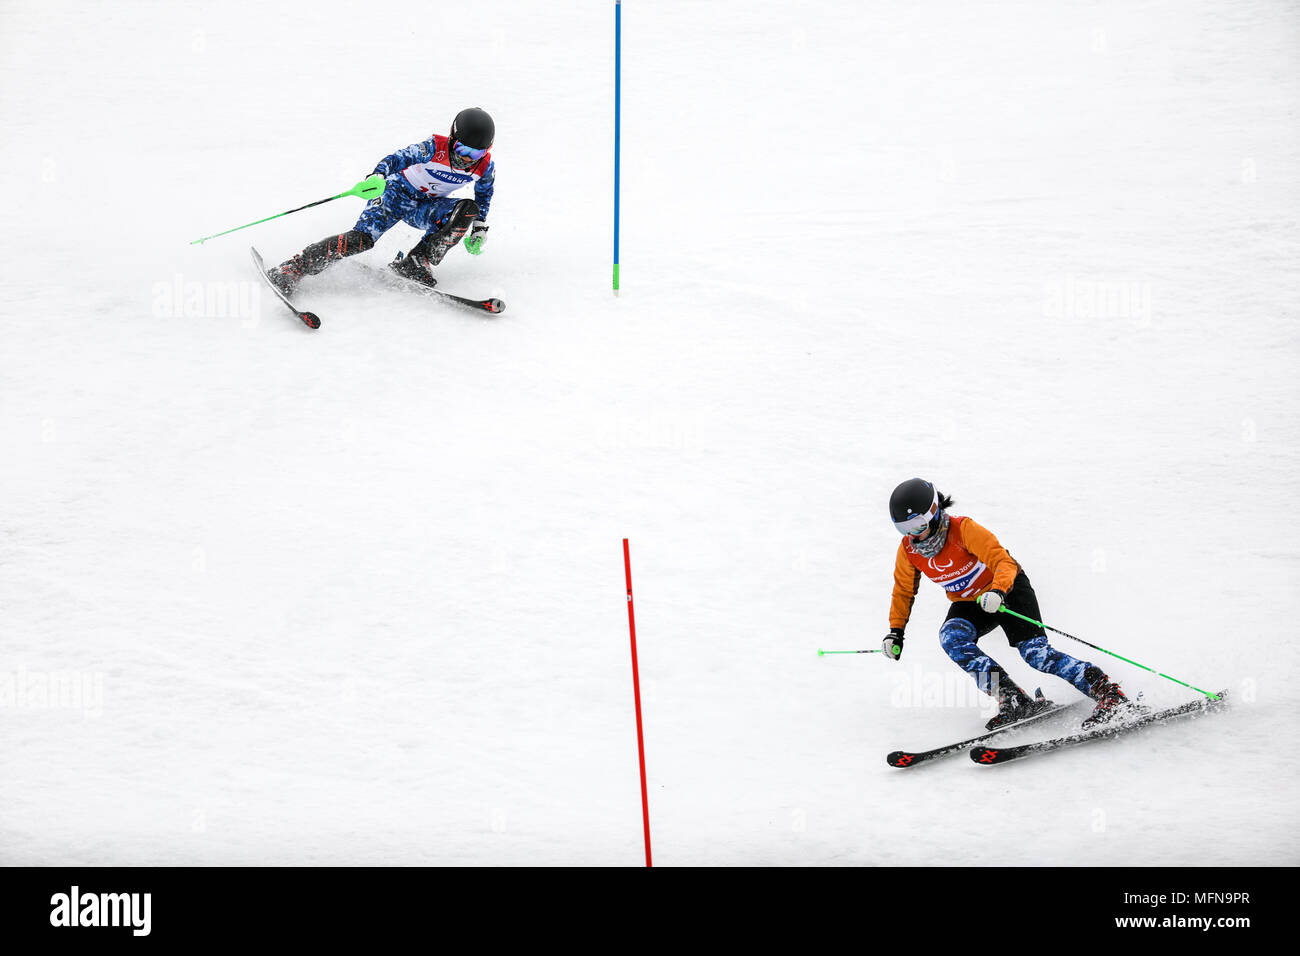 PyeongChang 2018 March 18th . Women's Slalom. Winter paralympic games. Stock Photo